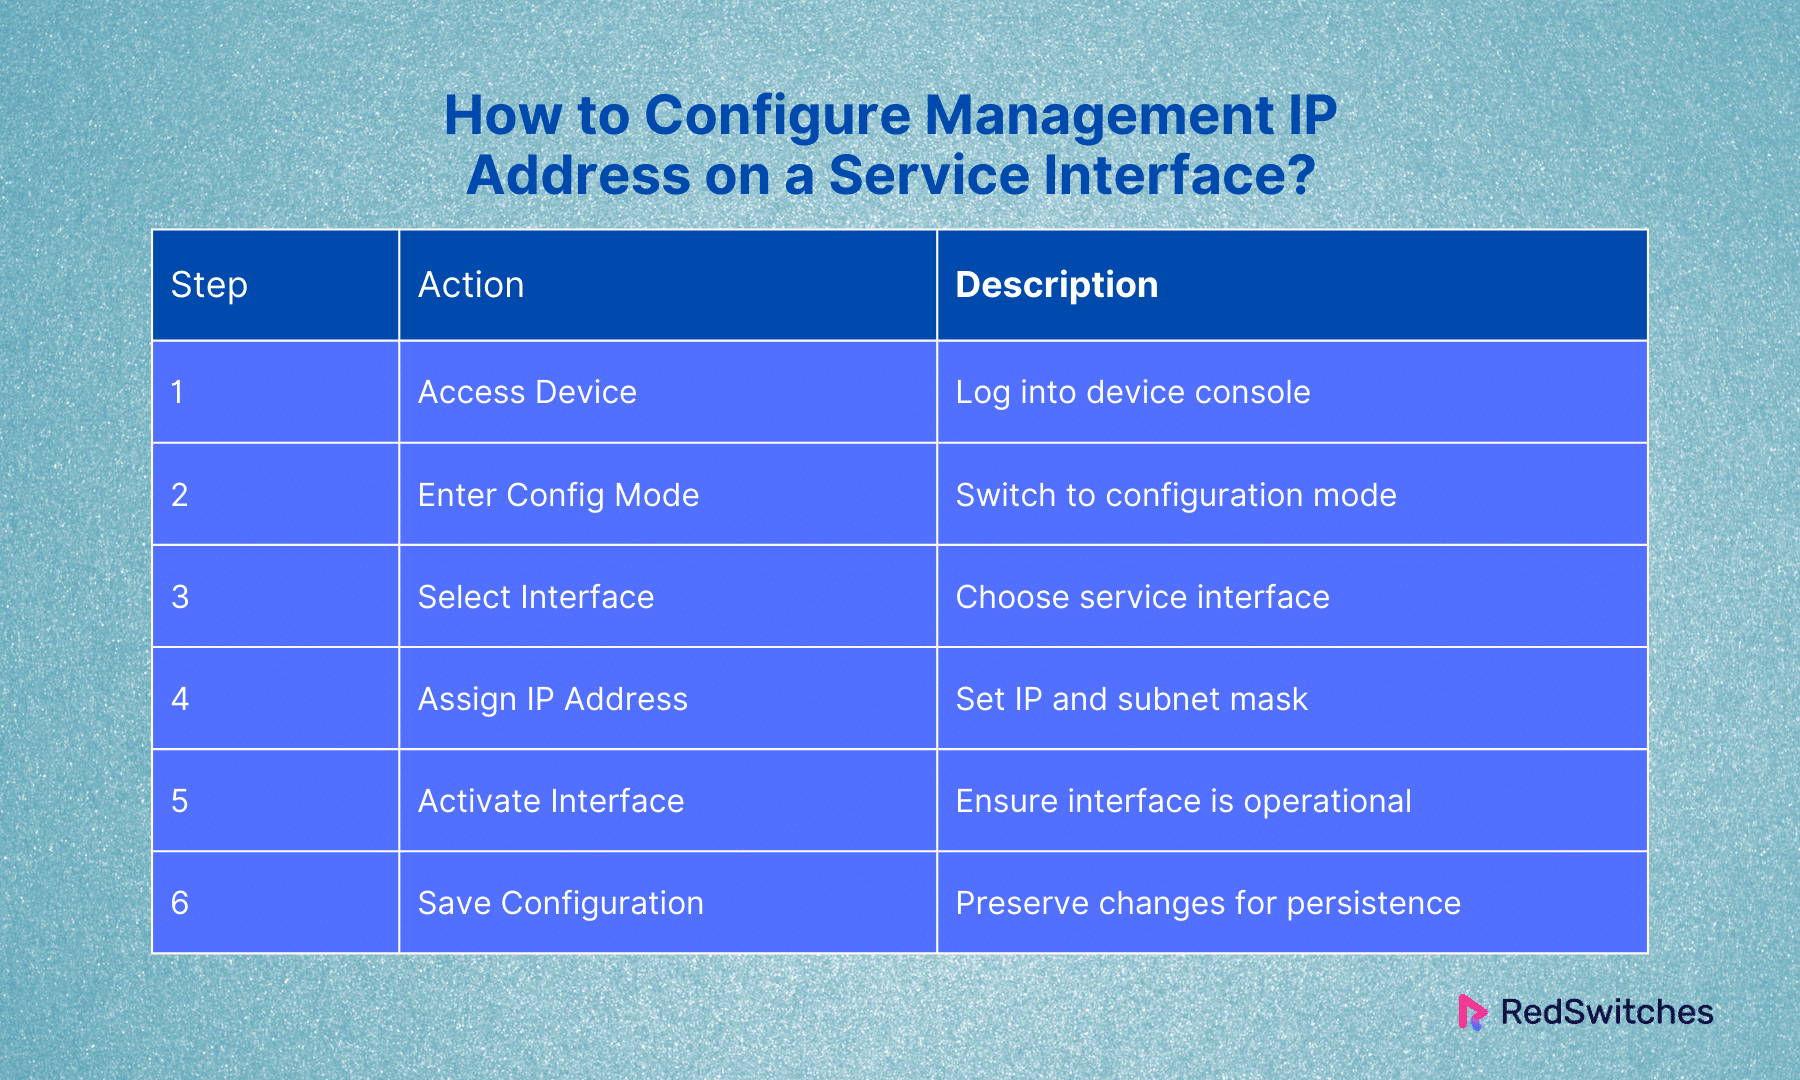 How to Configure Management IP Address on a Service Interface